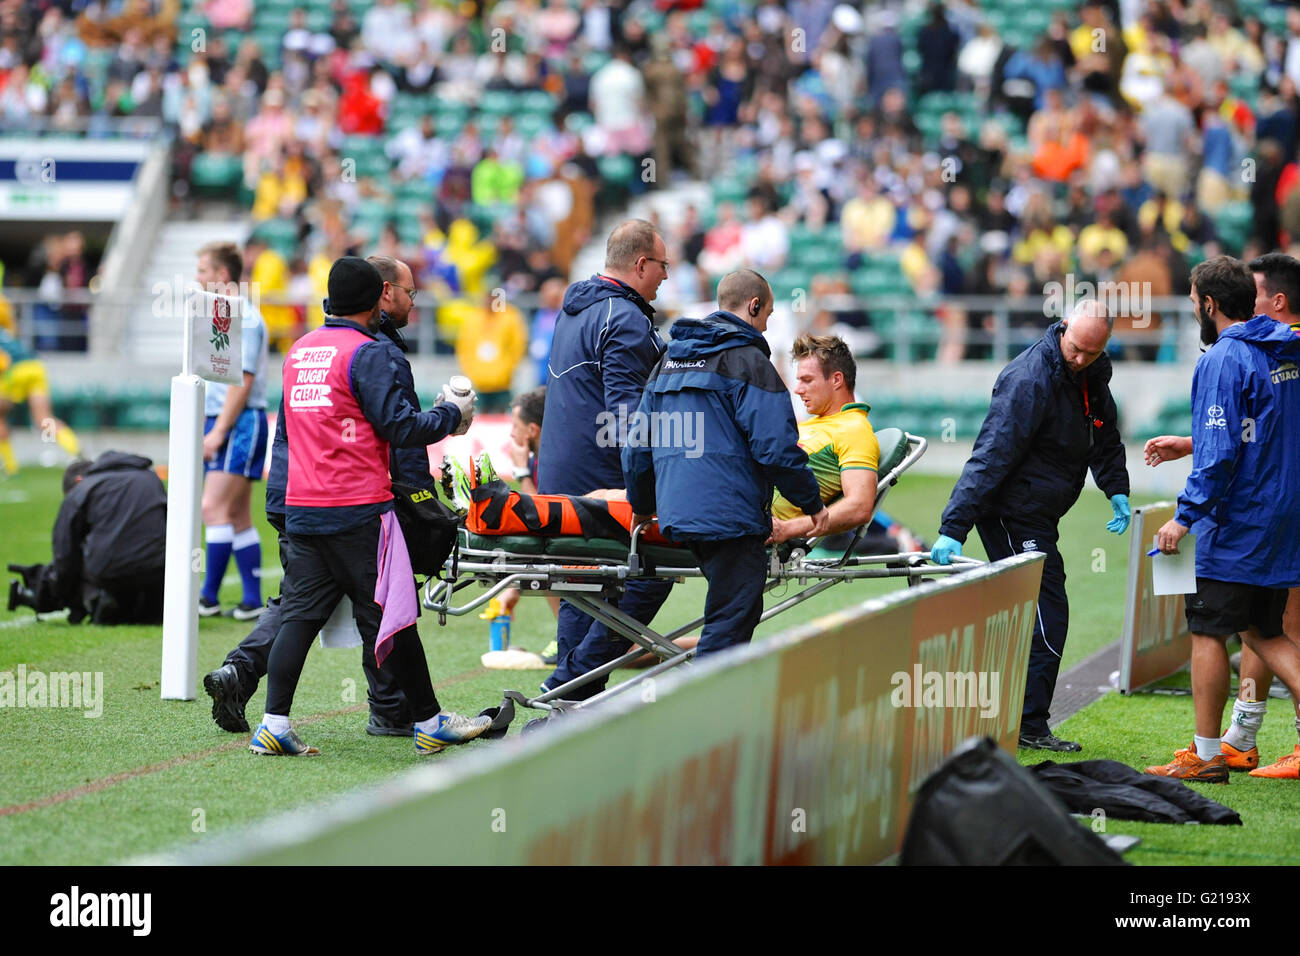 London, UK. 21st May, 2016. Medical personnel taking Lucas Muller (BRA) to the medical centre. Muller was left lying on the pitch in agony after an aggressive tackle in the pool match with Russia, HSBC World Rugby Sevens Series, Twickenham Stadium, London, UK. He was eventually stretchered off the pitch. Russia went on to win the match by 14-5. Credit:  Michael Preston/Alamy Live News Stock Photo